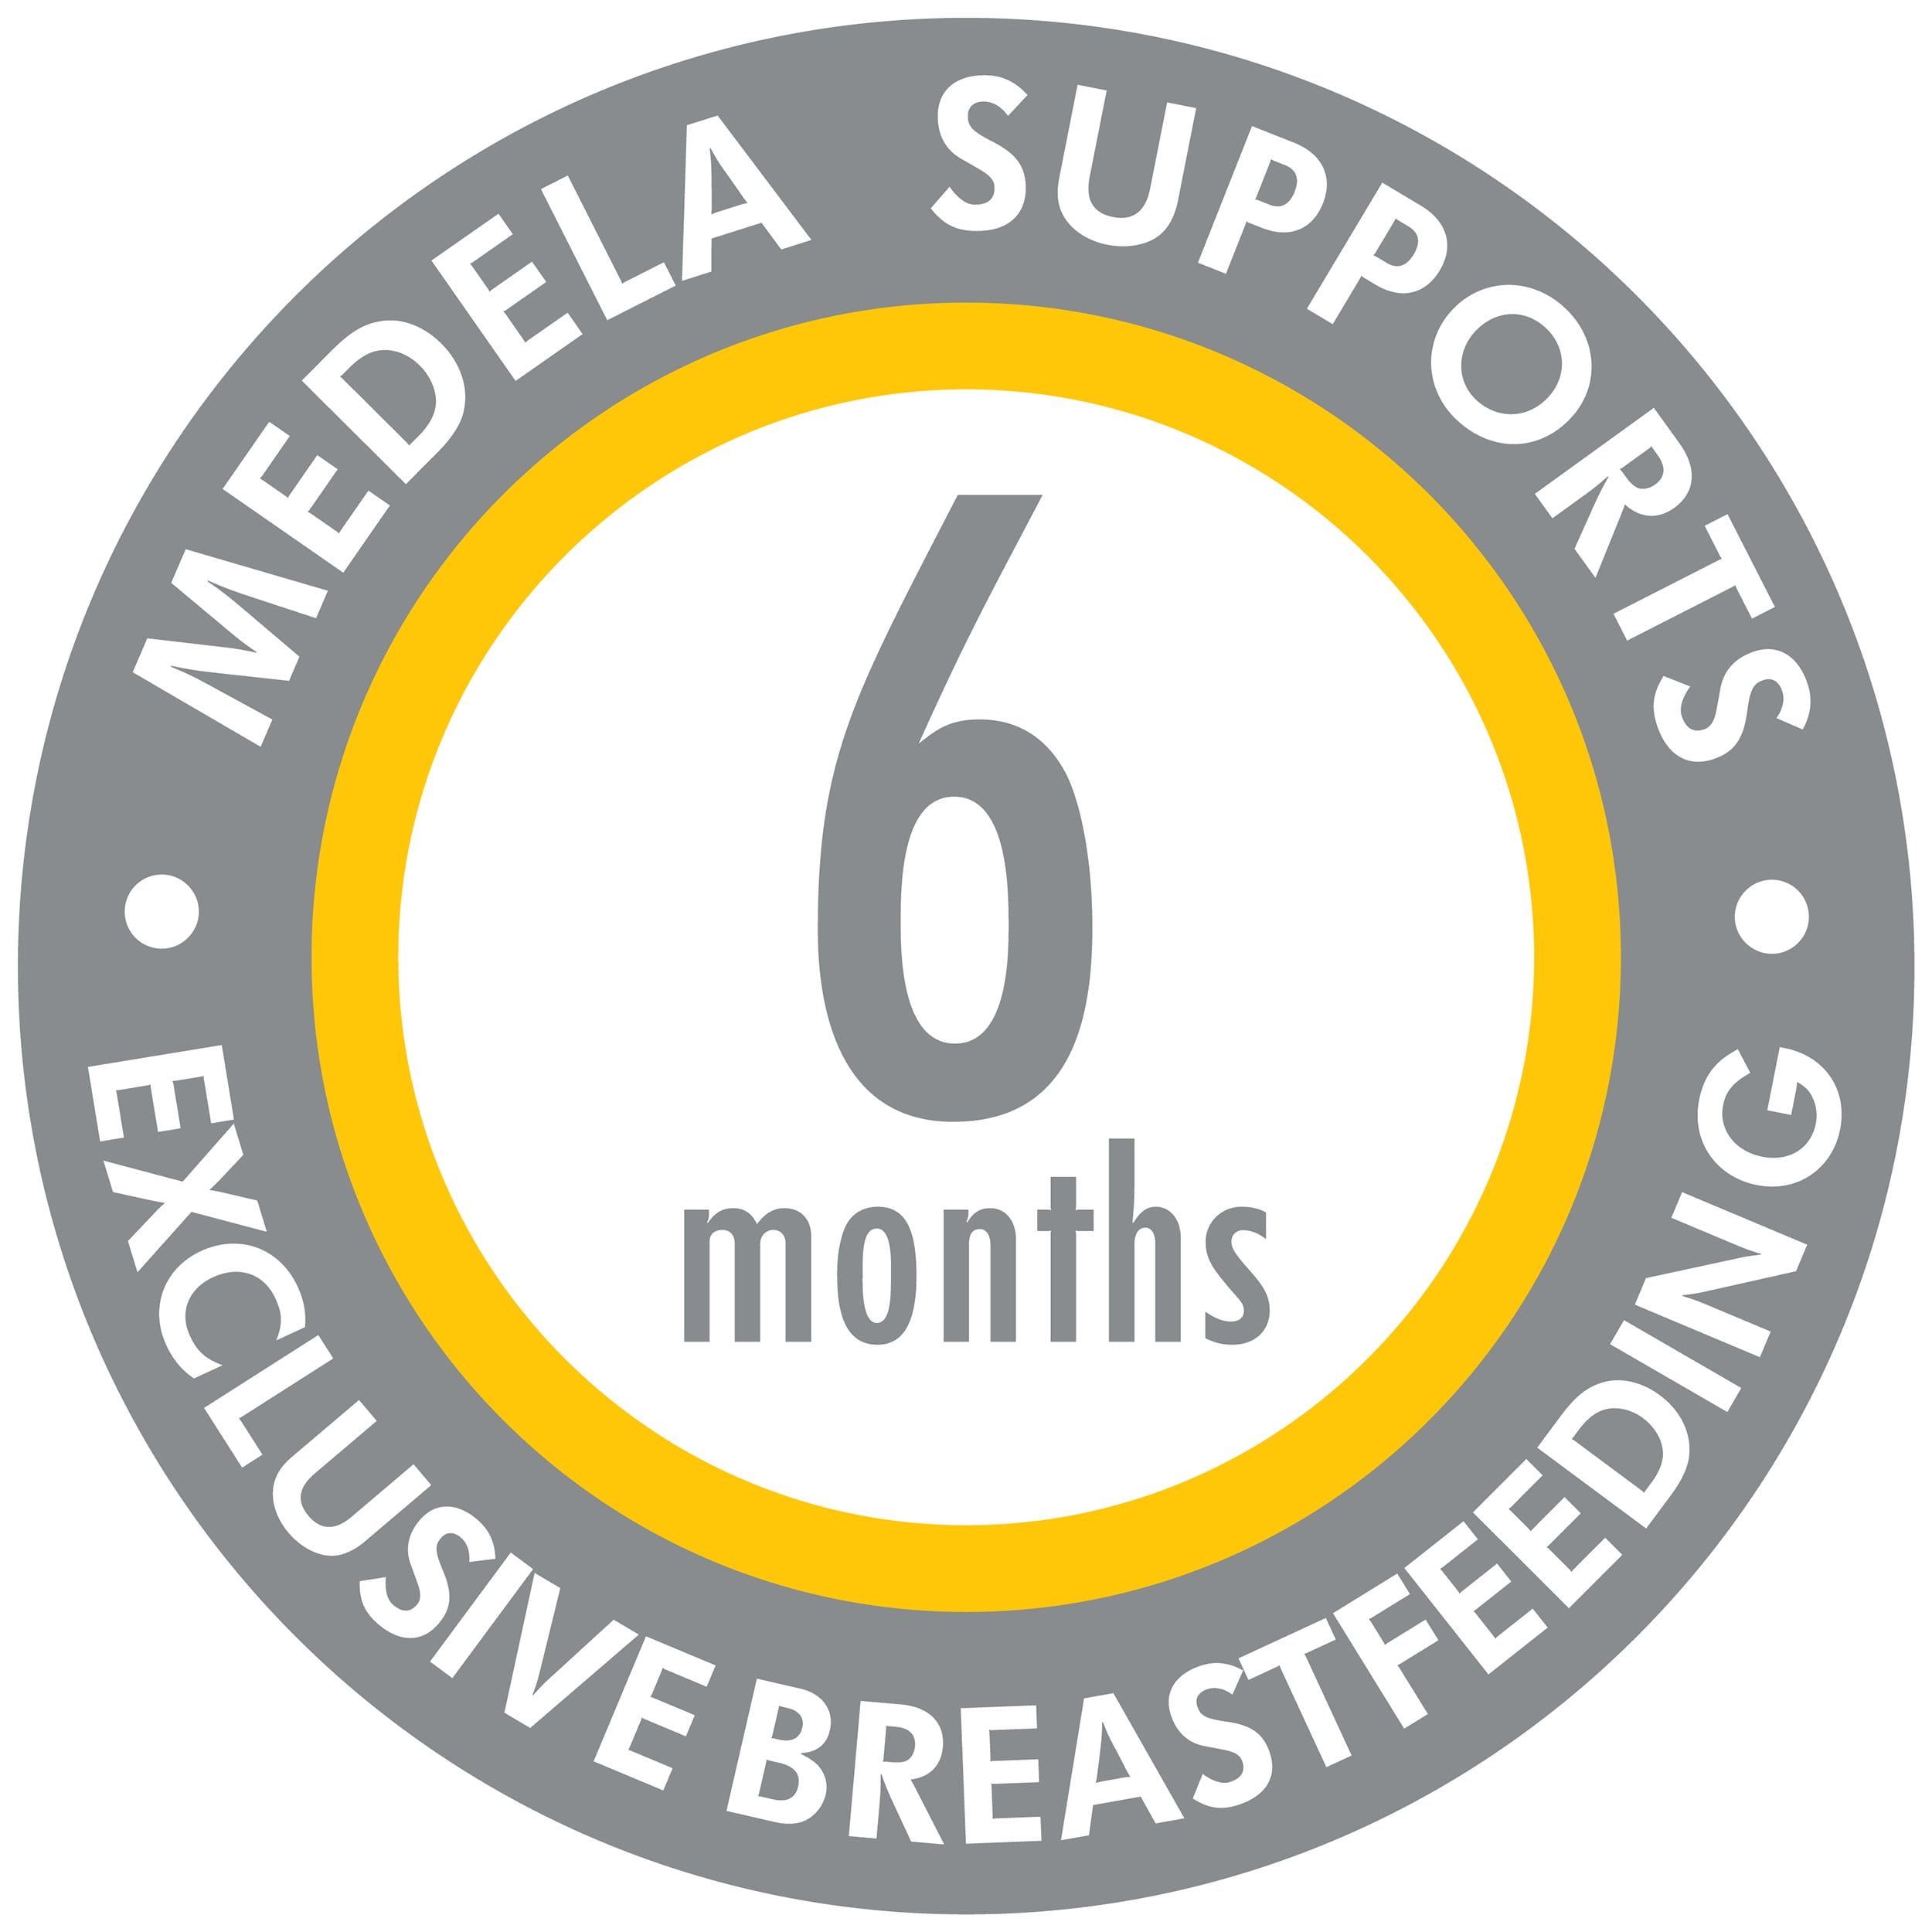 Medela Calma Bottle Nipple and Collection Bottles, Made without